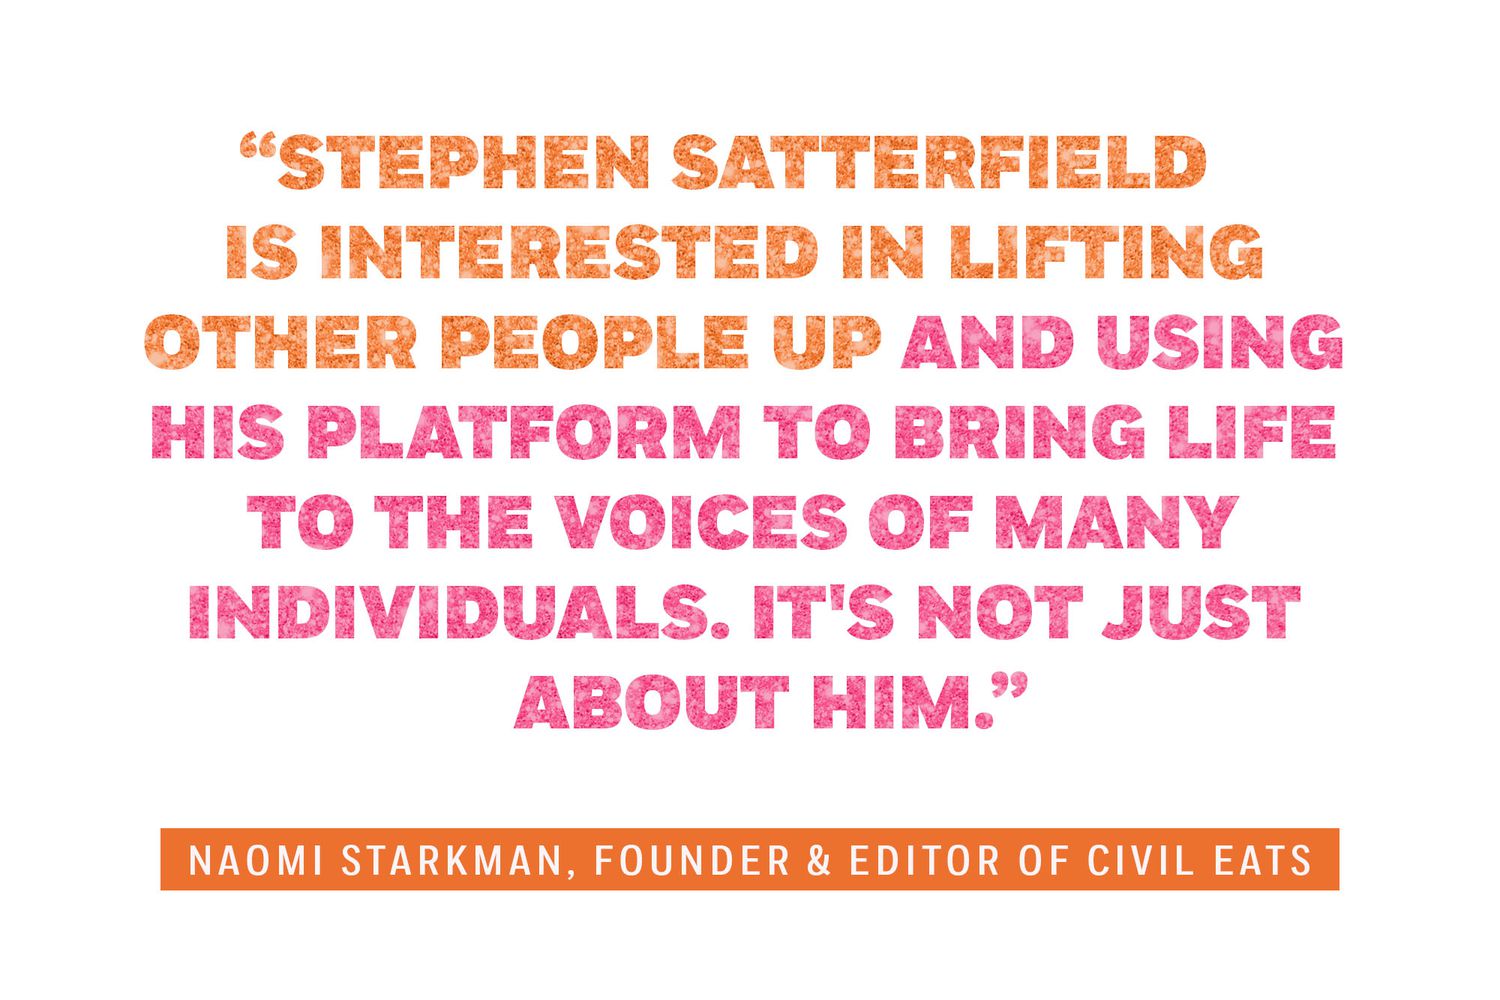 Stephen Satterfield is interested in lifting other people up and using his platform to bring life to the voices of many individuals. It's not just about him.